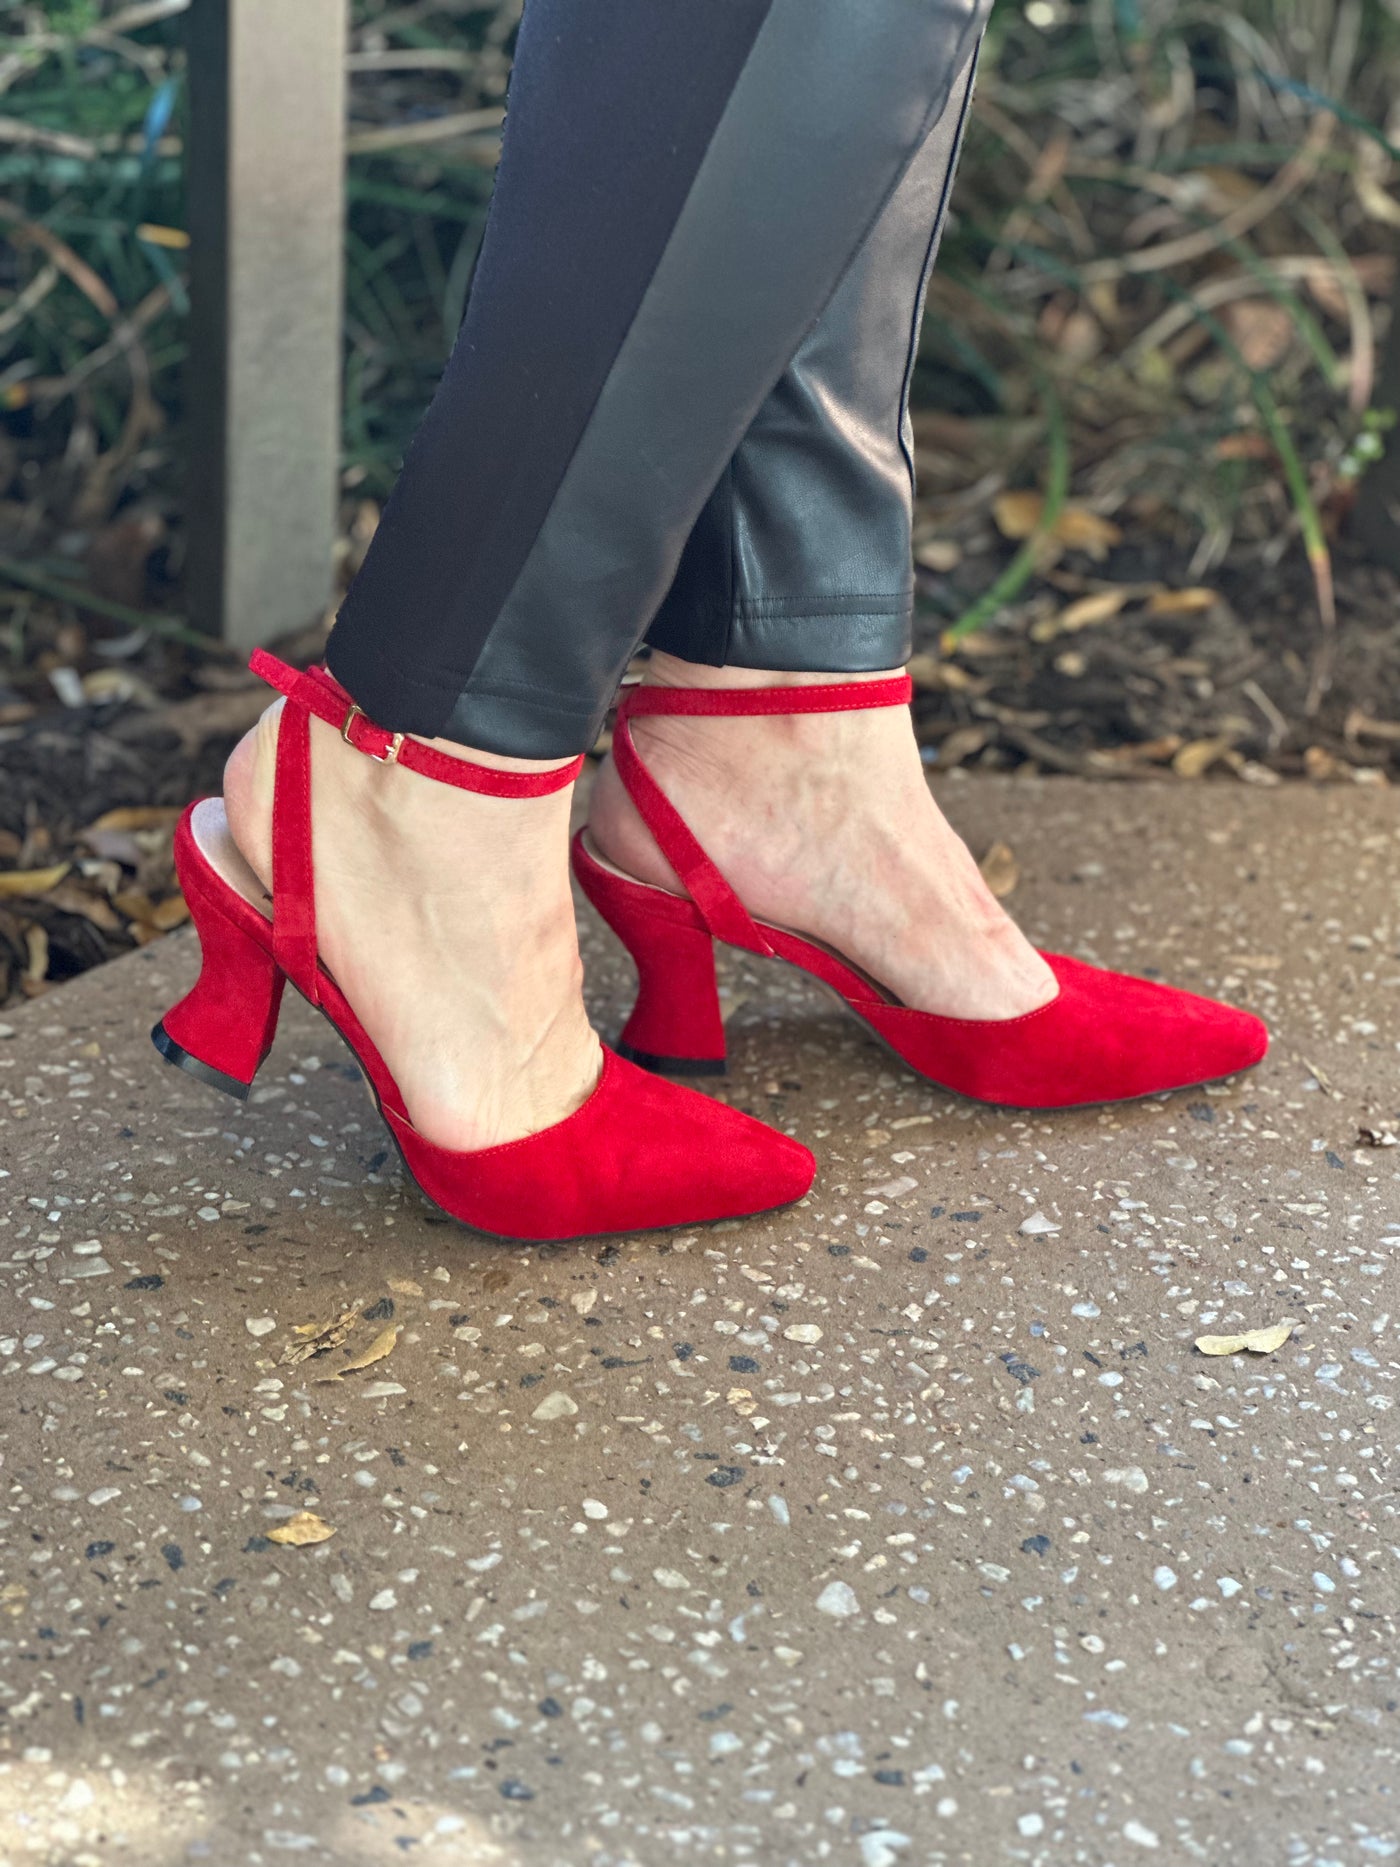 Red suede heels by Mollini Shoes